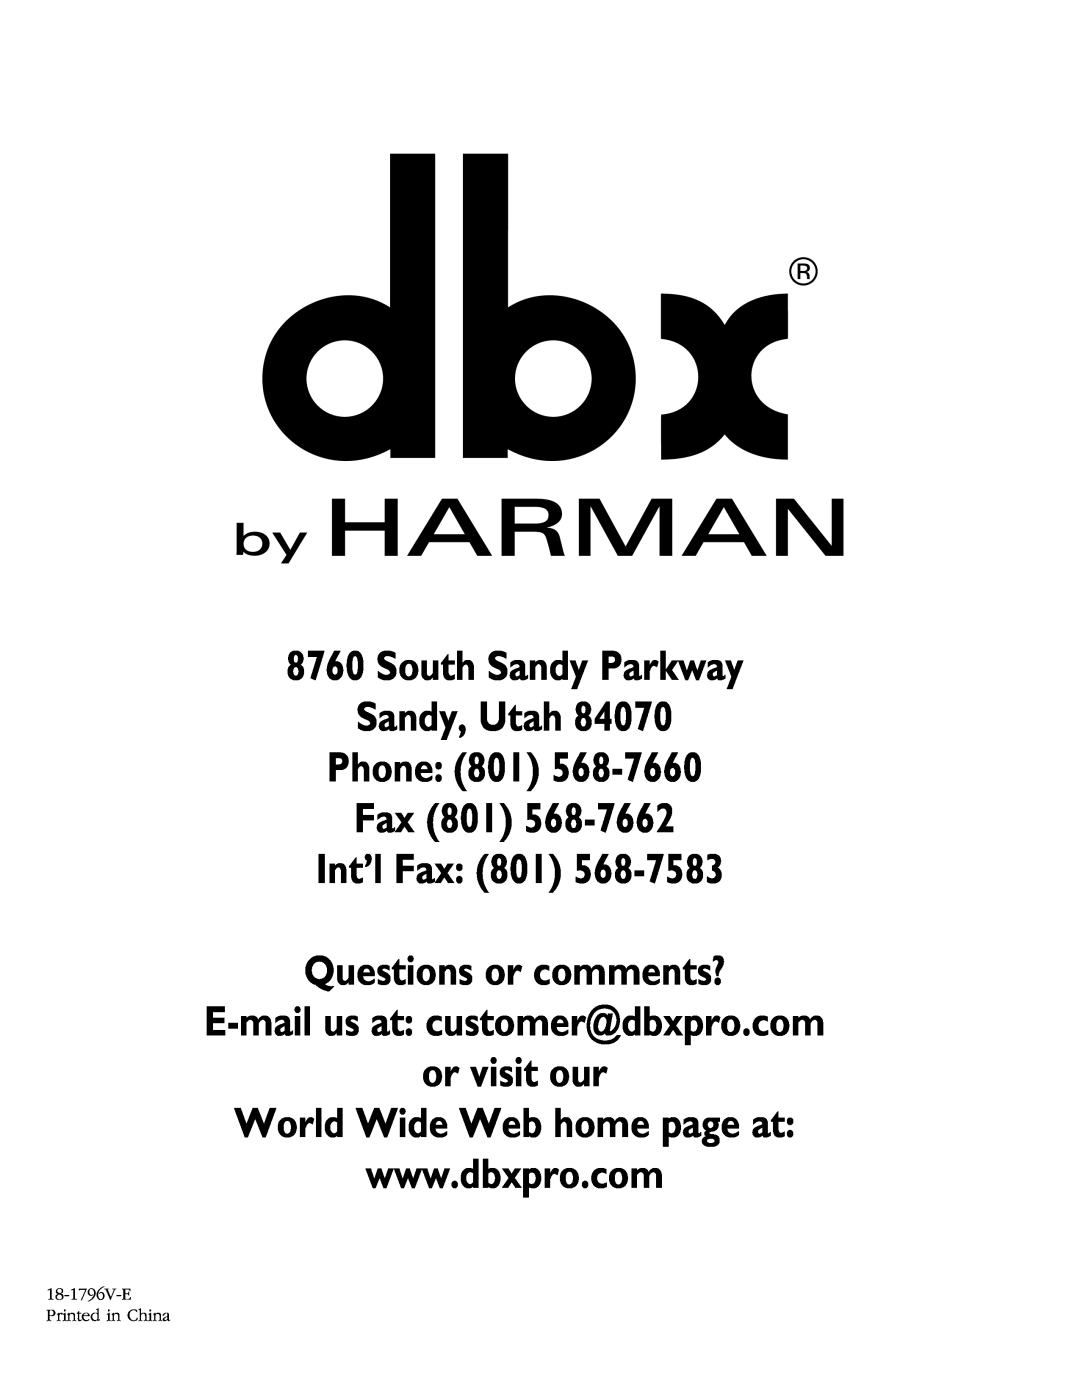 JBL 260 user manual South Sandy Parkway Sandy, Utah Phone: 801, Fax 801 Int’l Fax: 801 Questions or comments? 